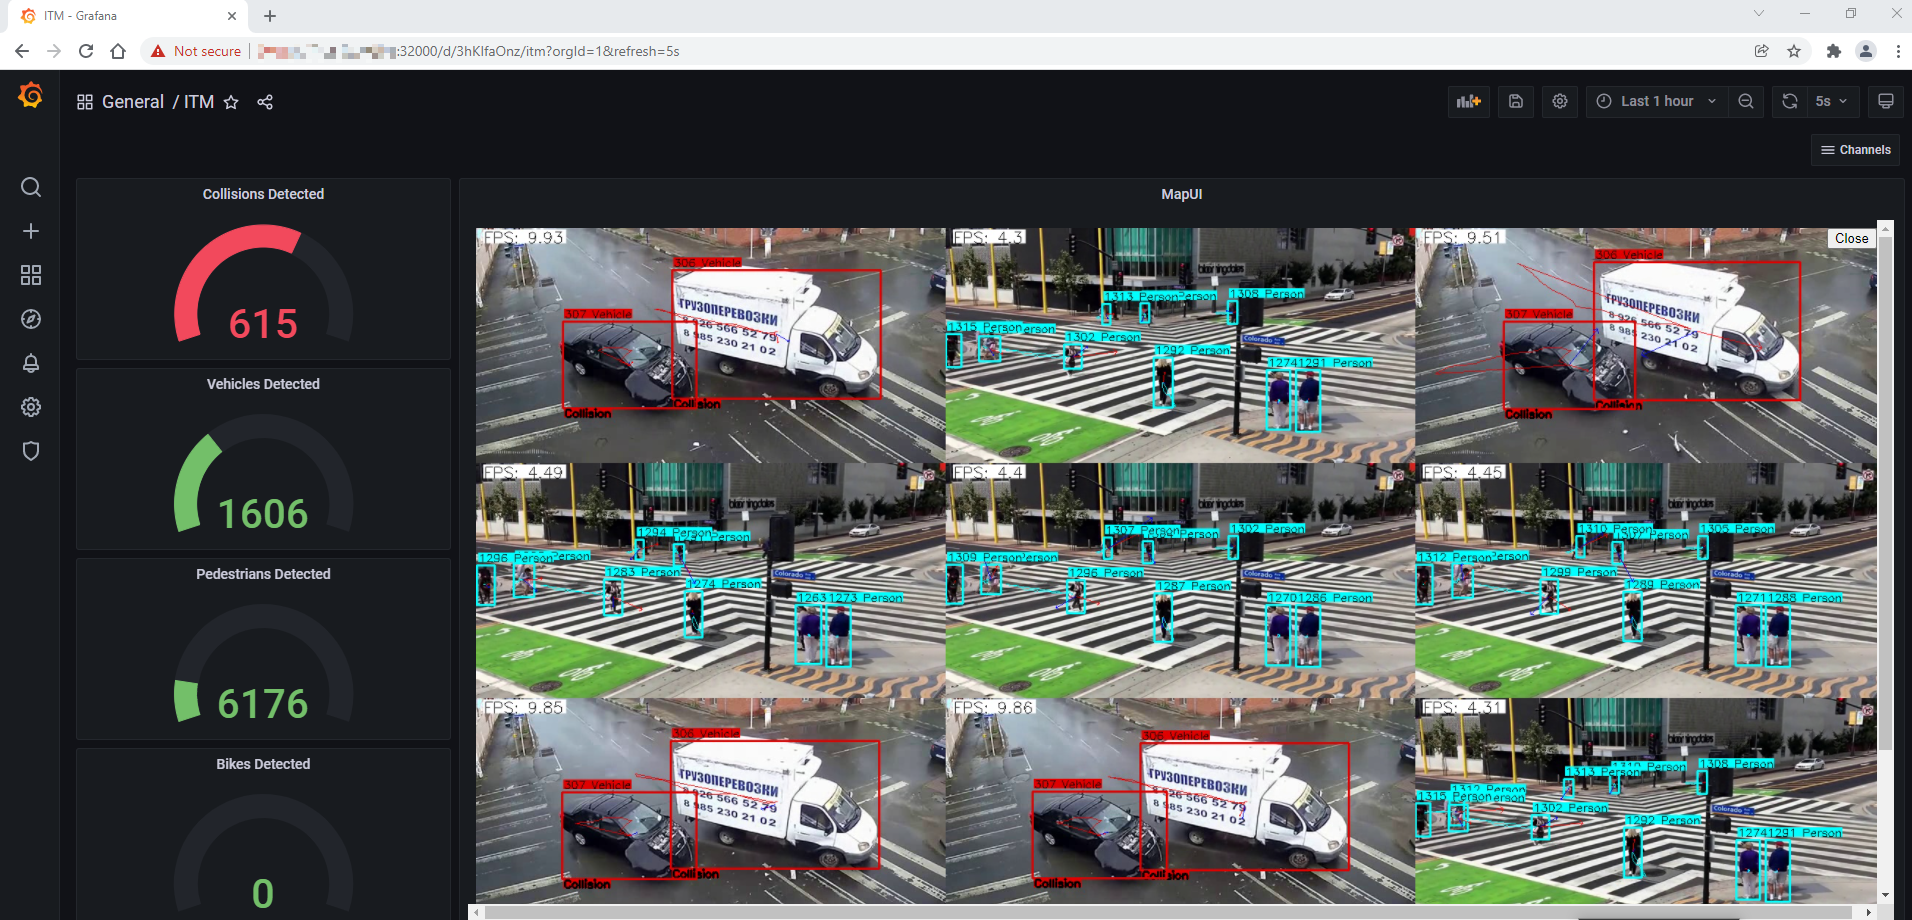 A web app dashboard showing a grid of 9 surveillance camera video feeds. In each feed, detected cars are brightly outlined with red and detected pedestrians are brightly outlined with blue. The sidebar shows four metrics: number of collisions detected, number of vehicles detected, number of pedestrians detected, and number of bikes detected.